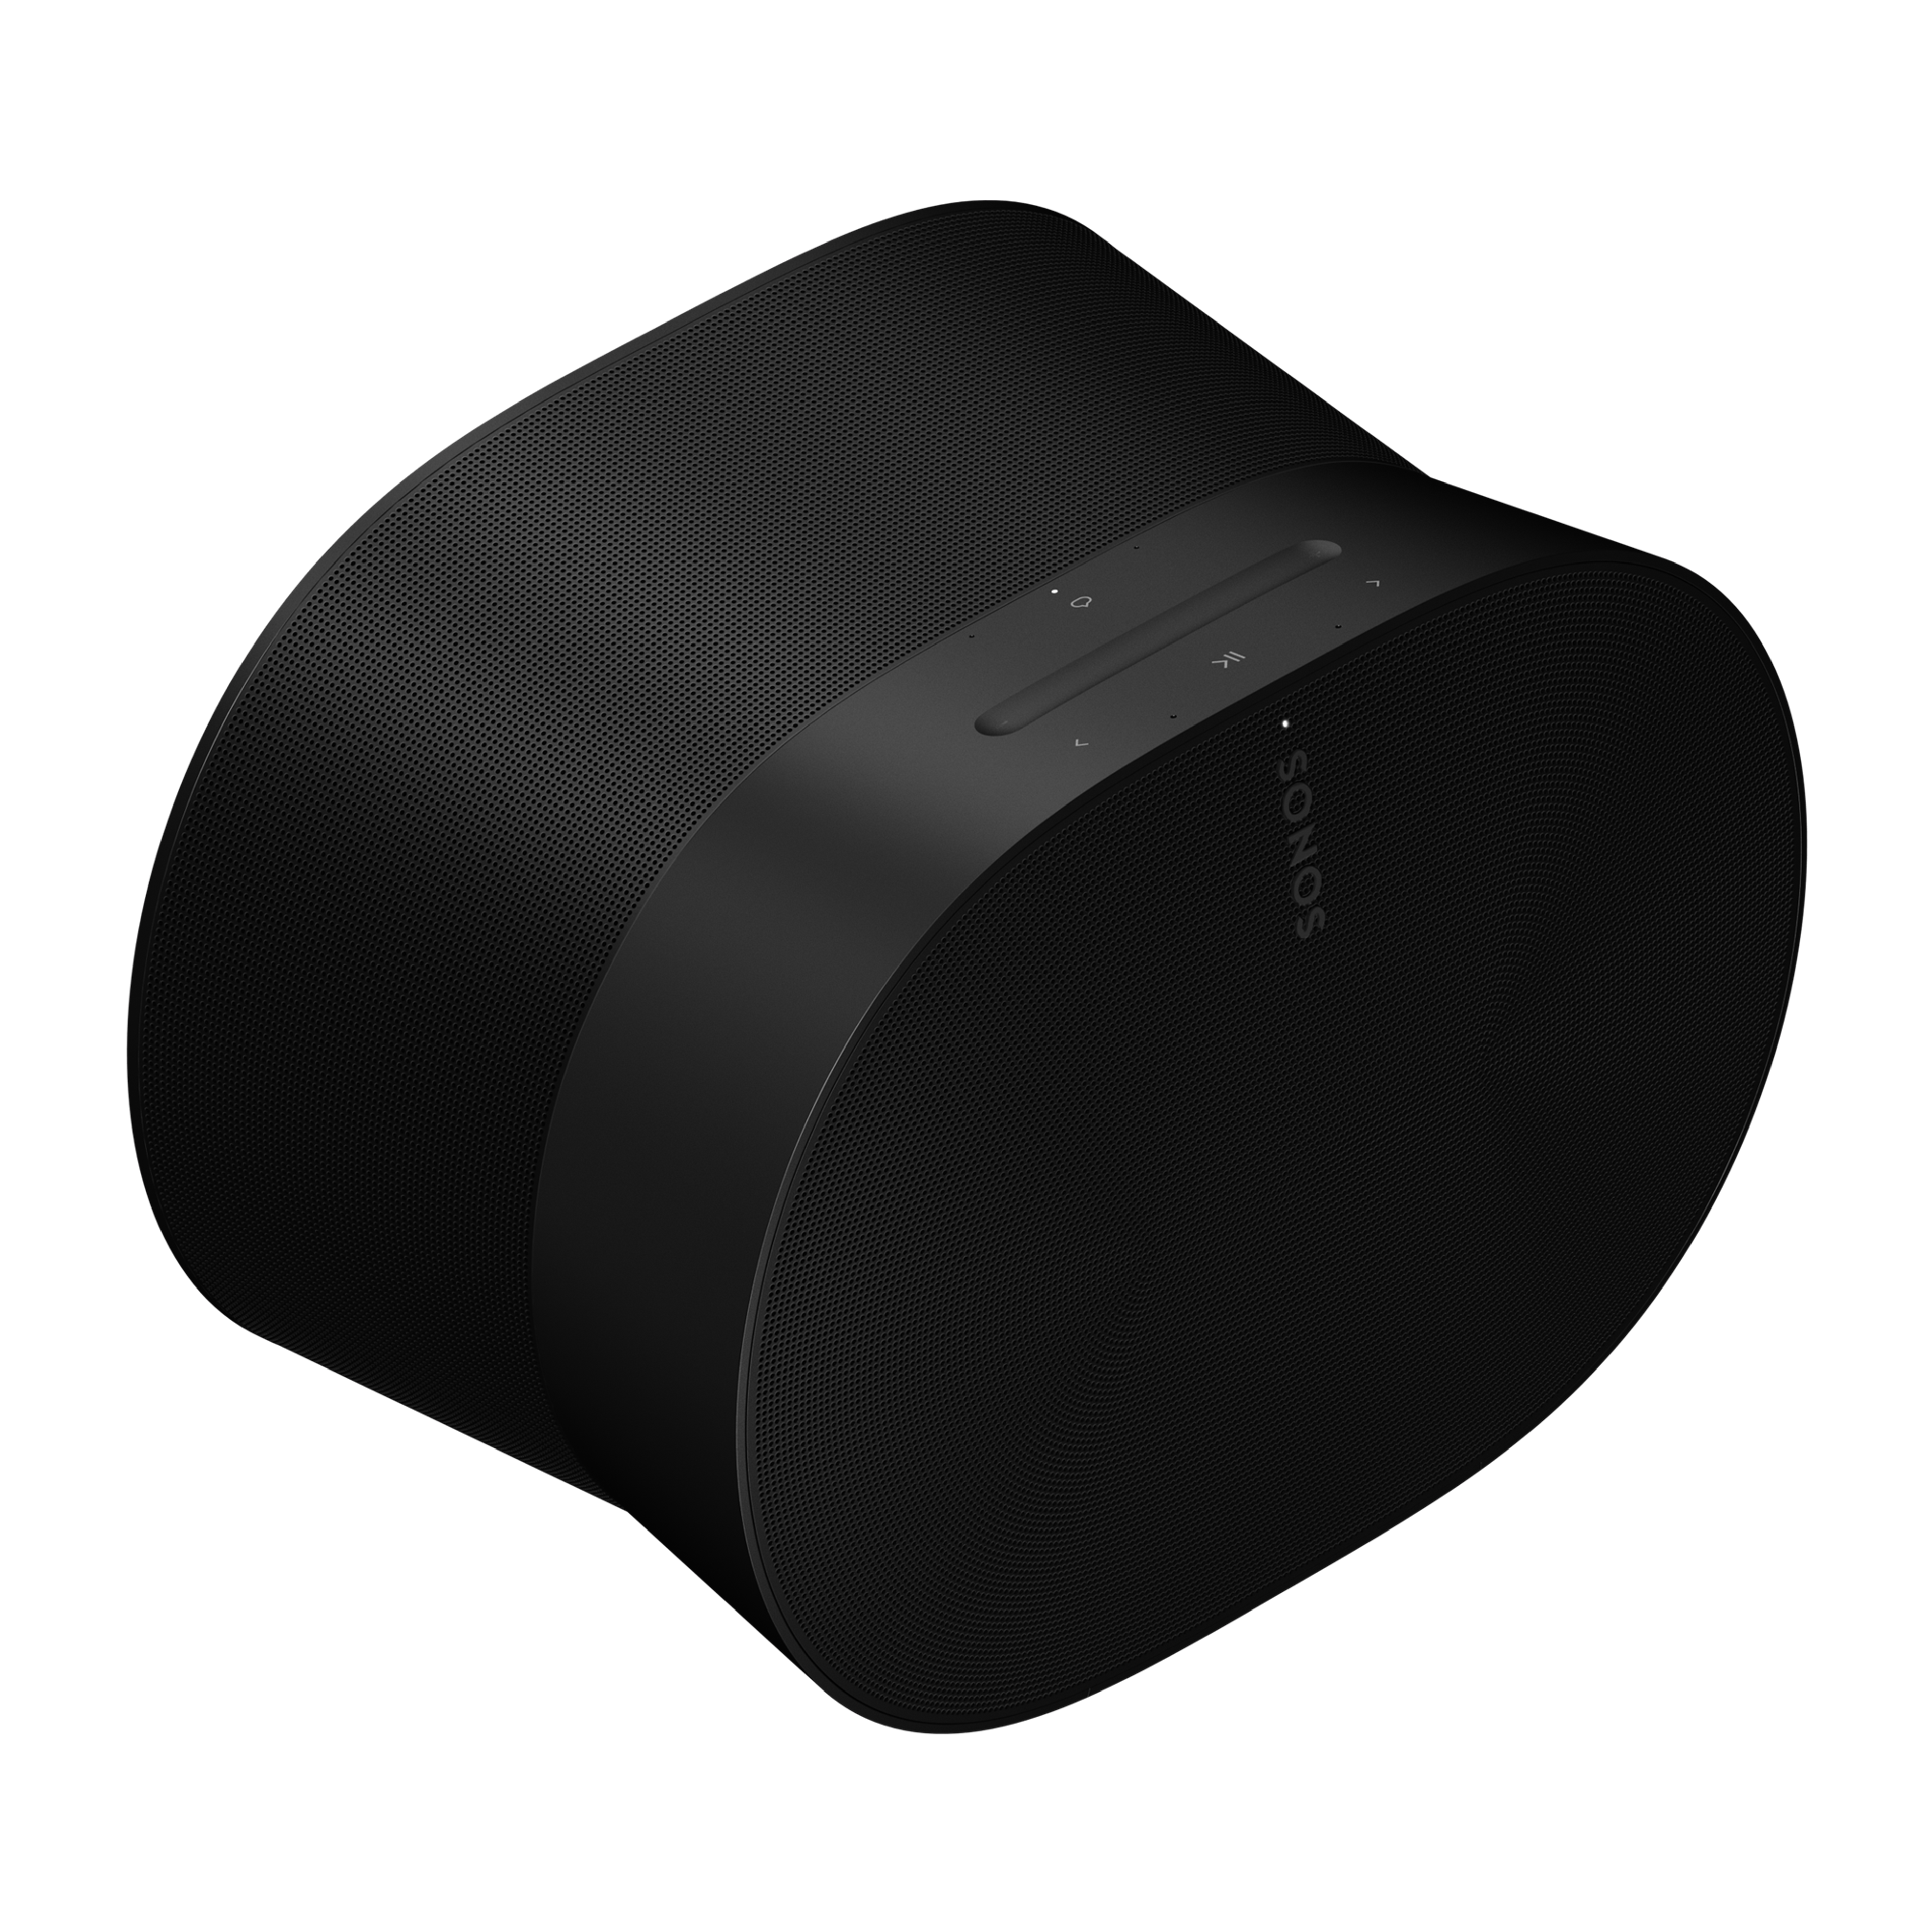 Image of the front and top of a black Sonos Era 300 turned at an angle